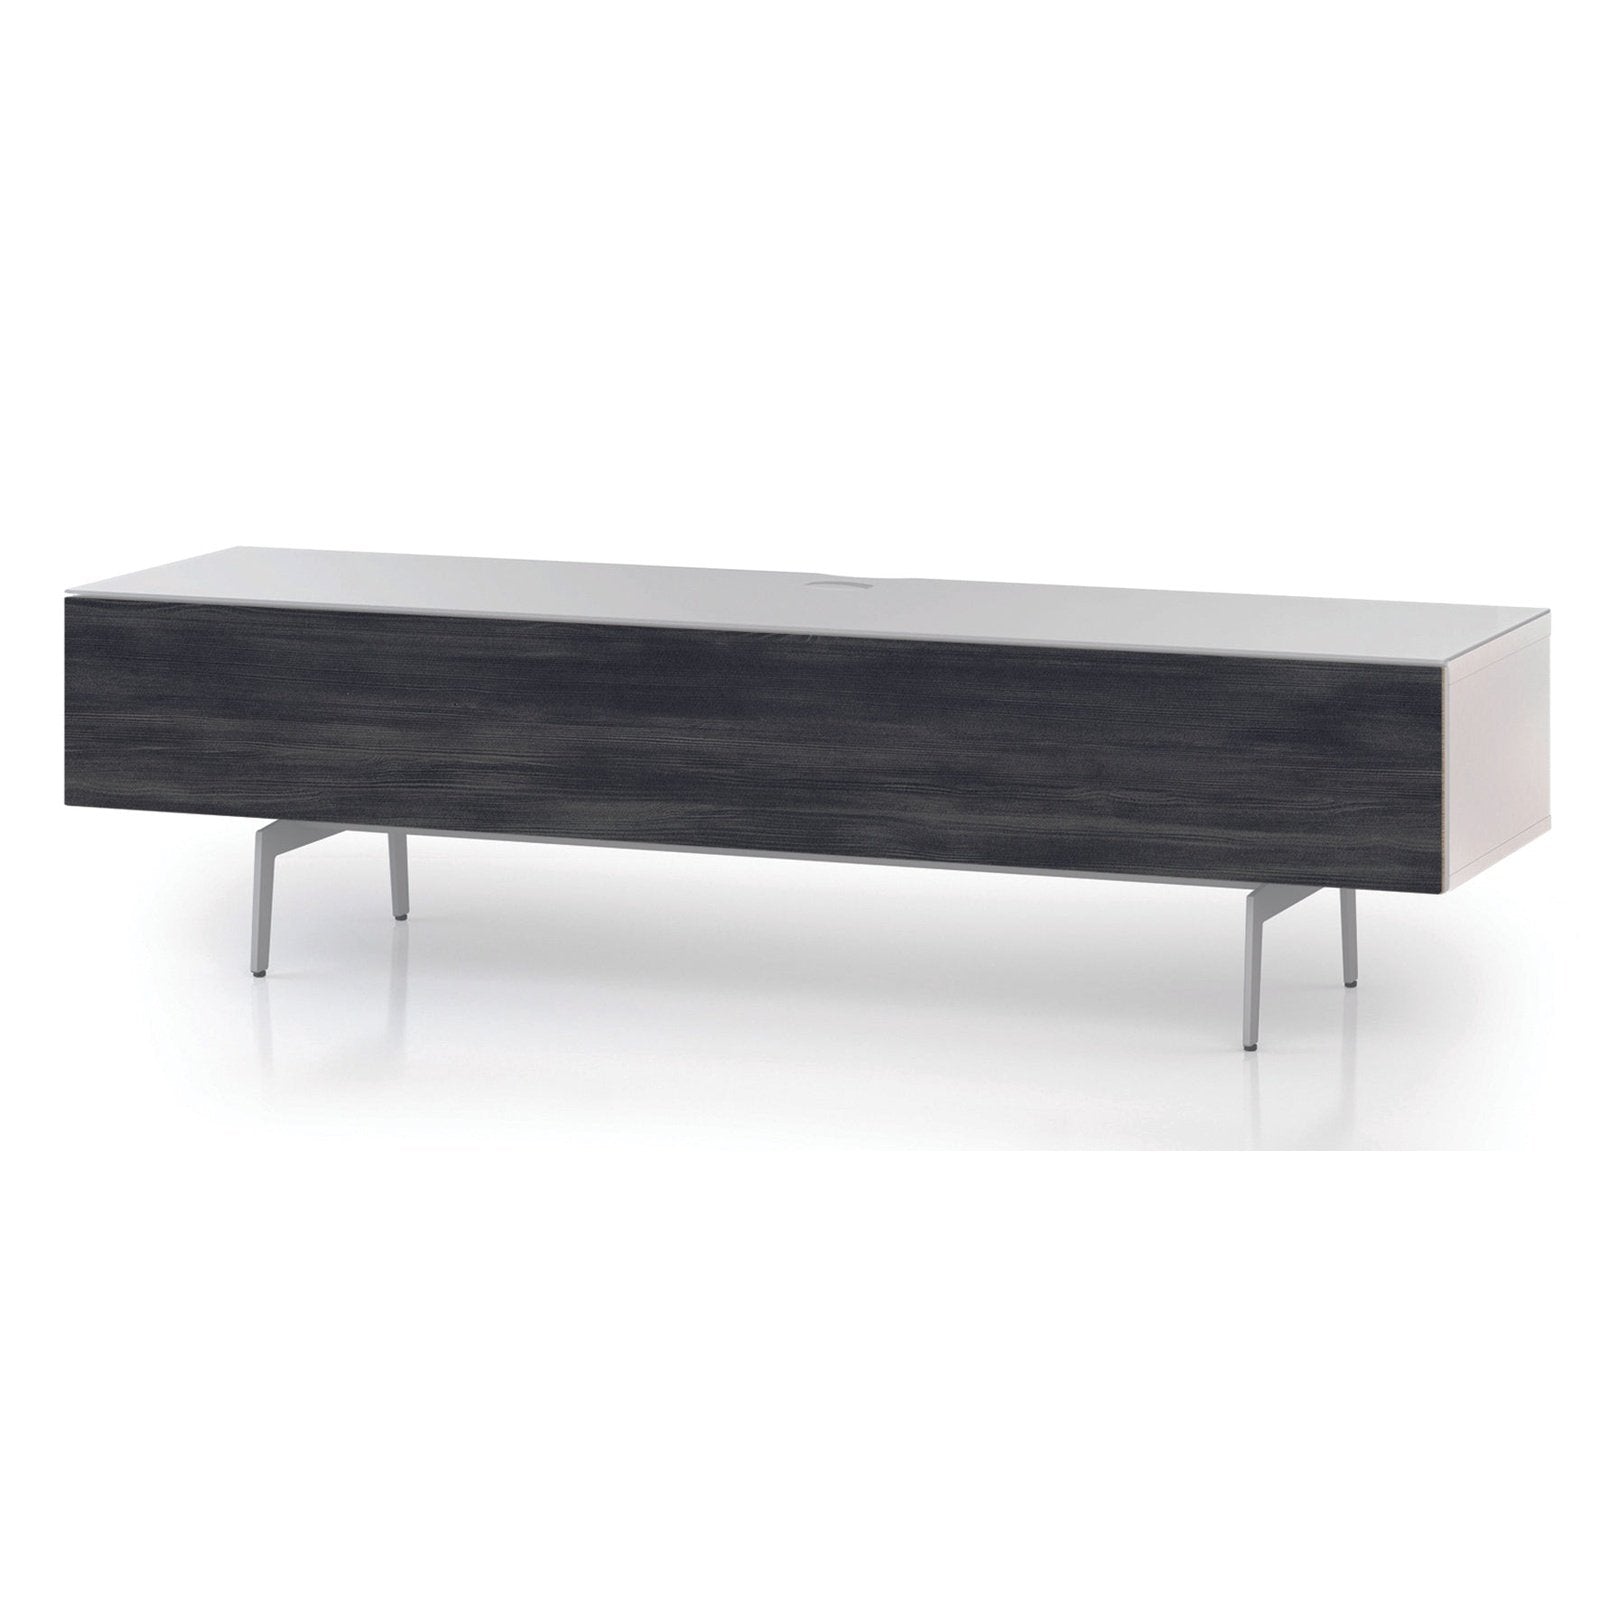 Sonorous STA362F Weiss, Klappe Nordic Wood, Fuss Weiss